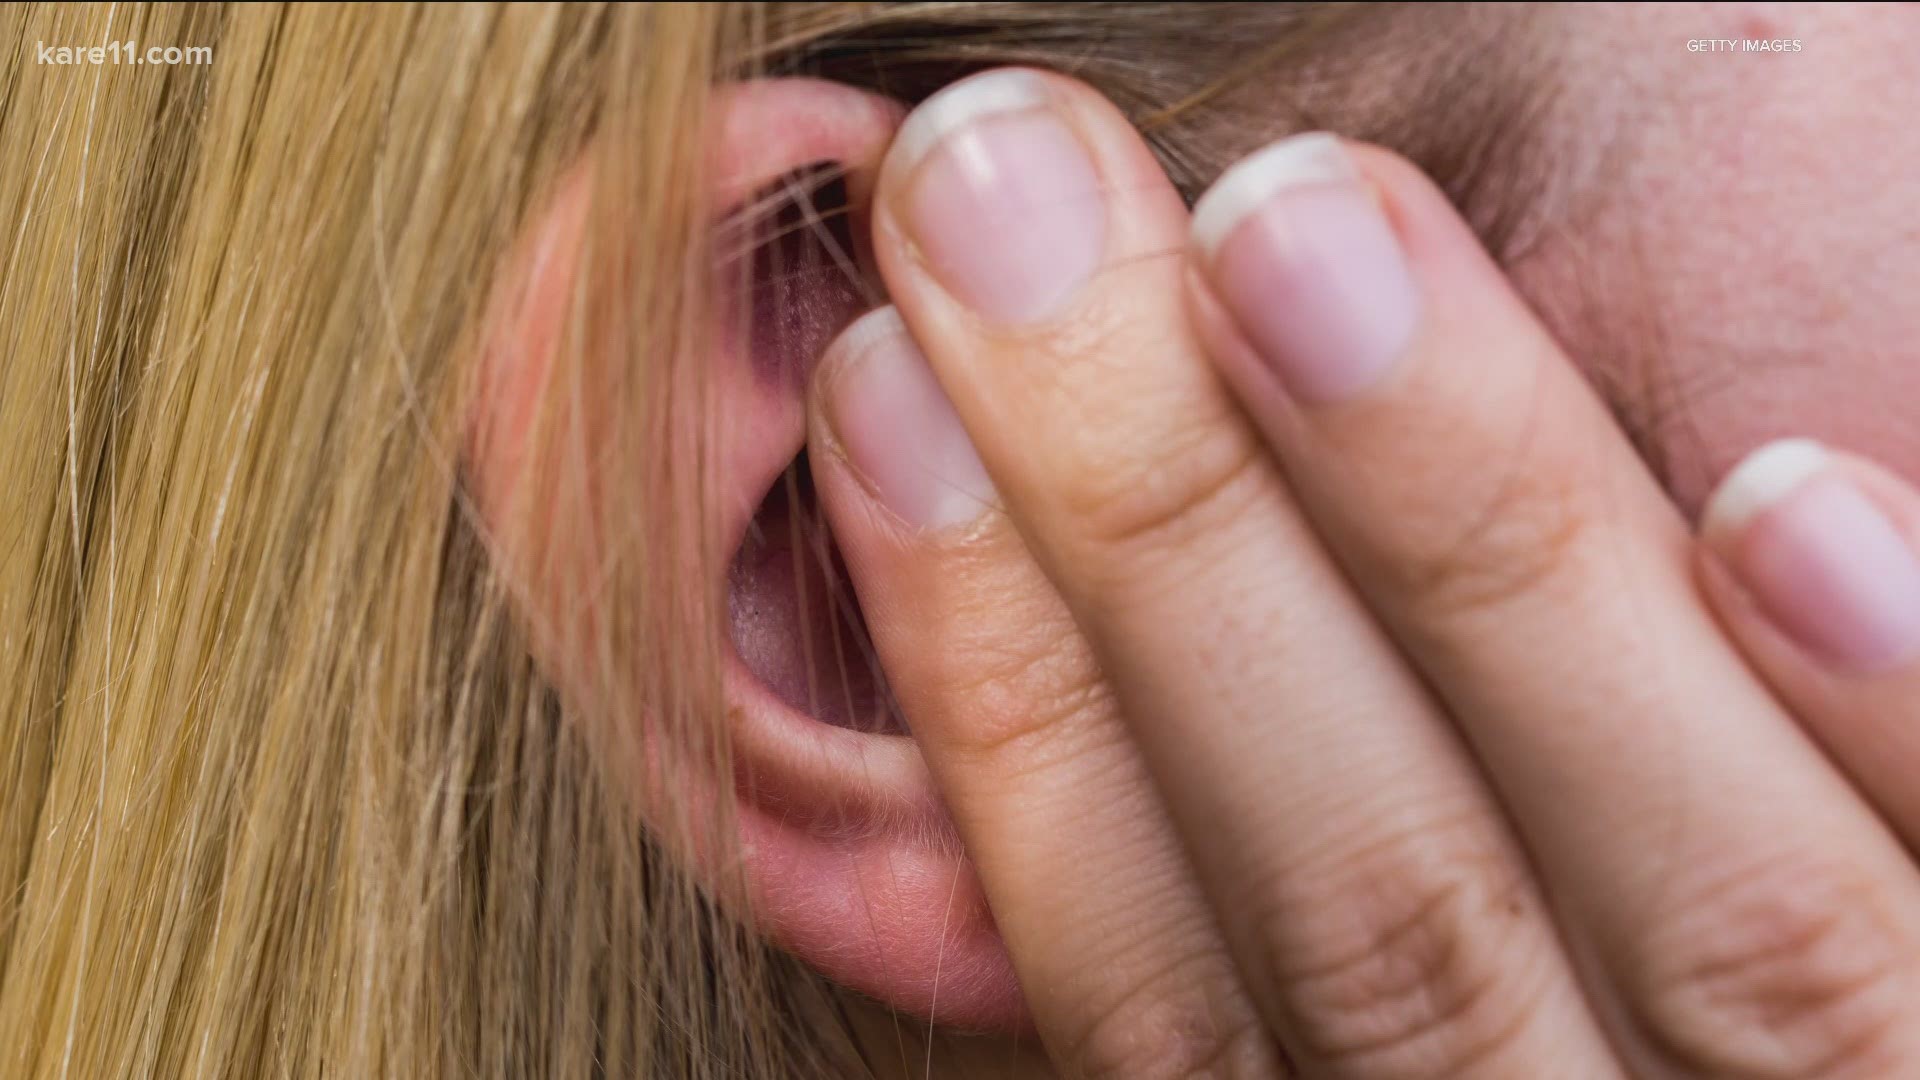 New research from the University of Minnesota could help reduce the impact tinnitus patients have.